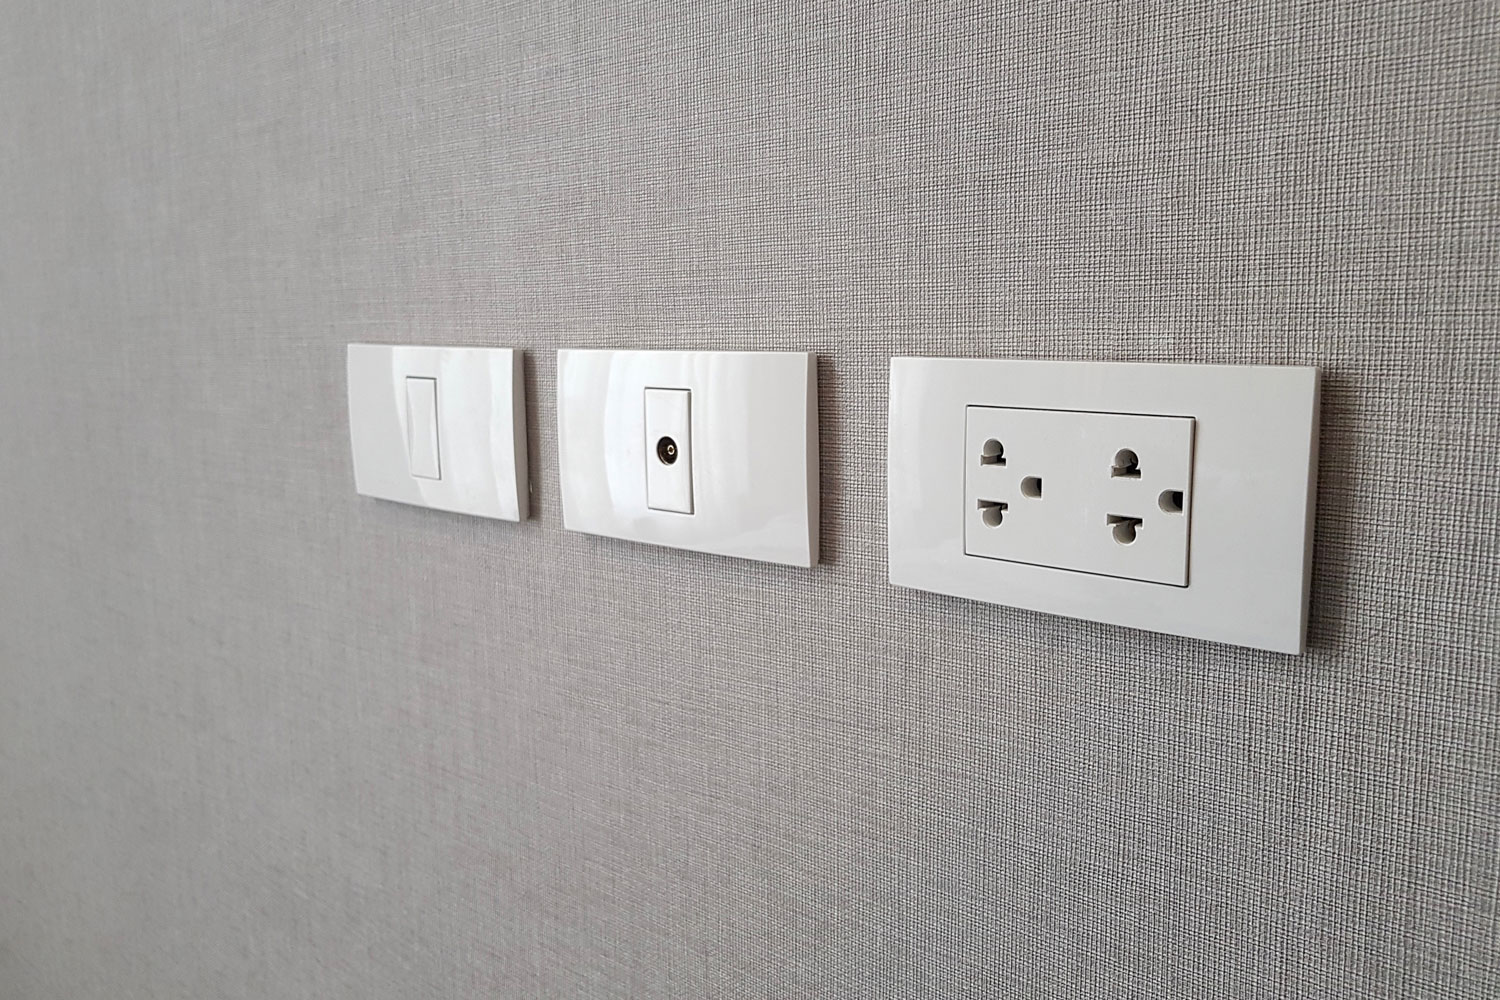 Plugs and switches mounted on the wall